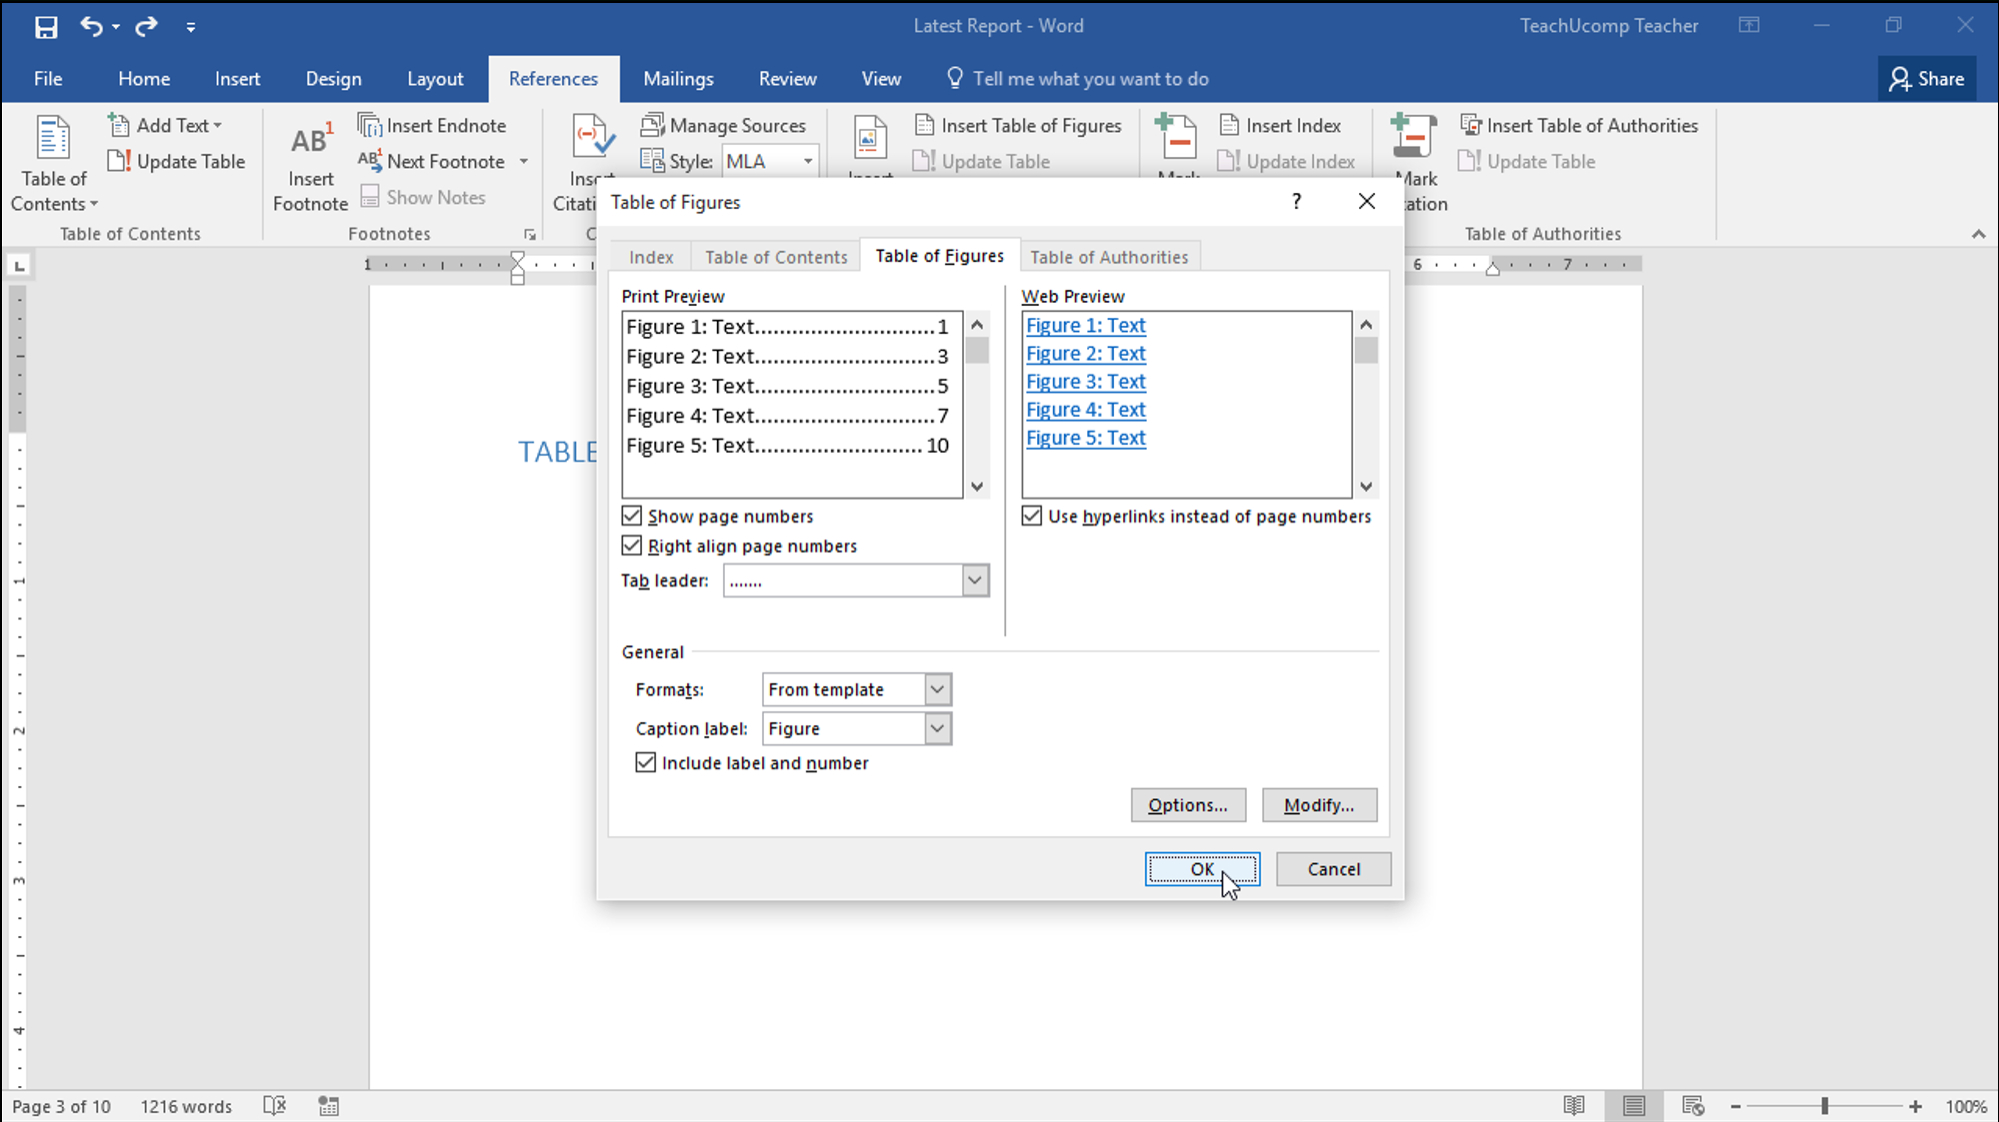 Insert A Table Of Figures In Word - Teachucomp, Inc. With Regard To Word 2013 Table Of Contents Template